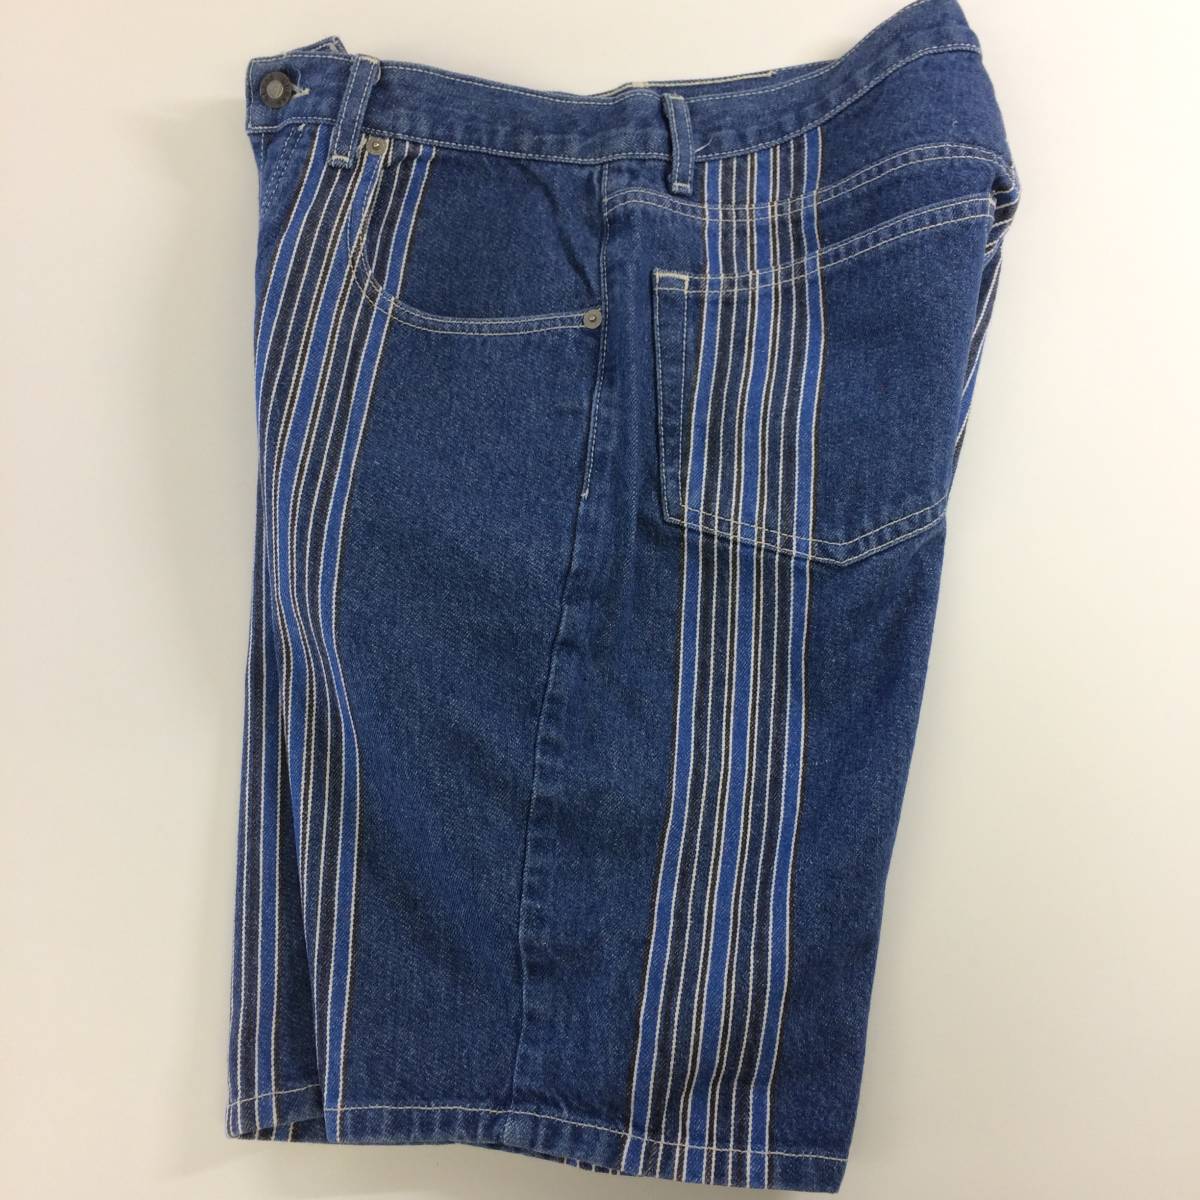 90s USA製 guess jeans デニムハーフパンツ w30